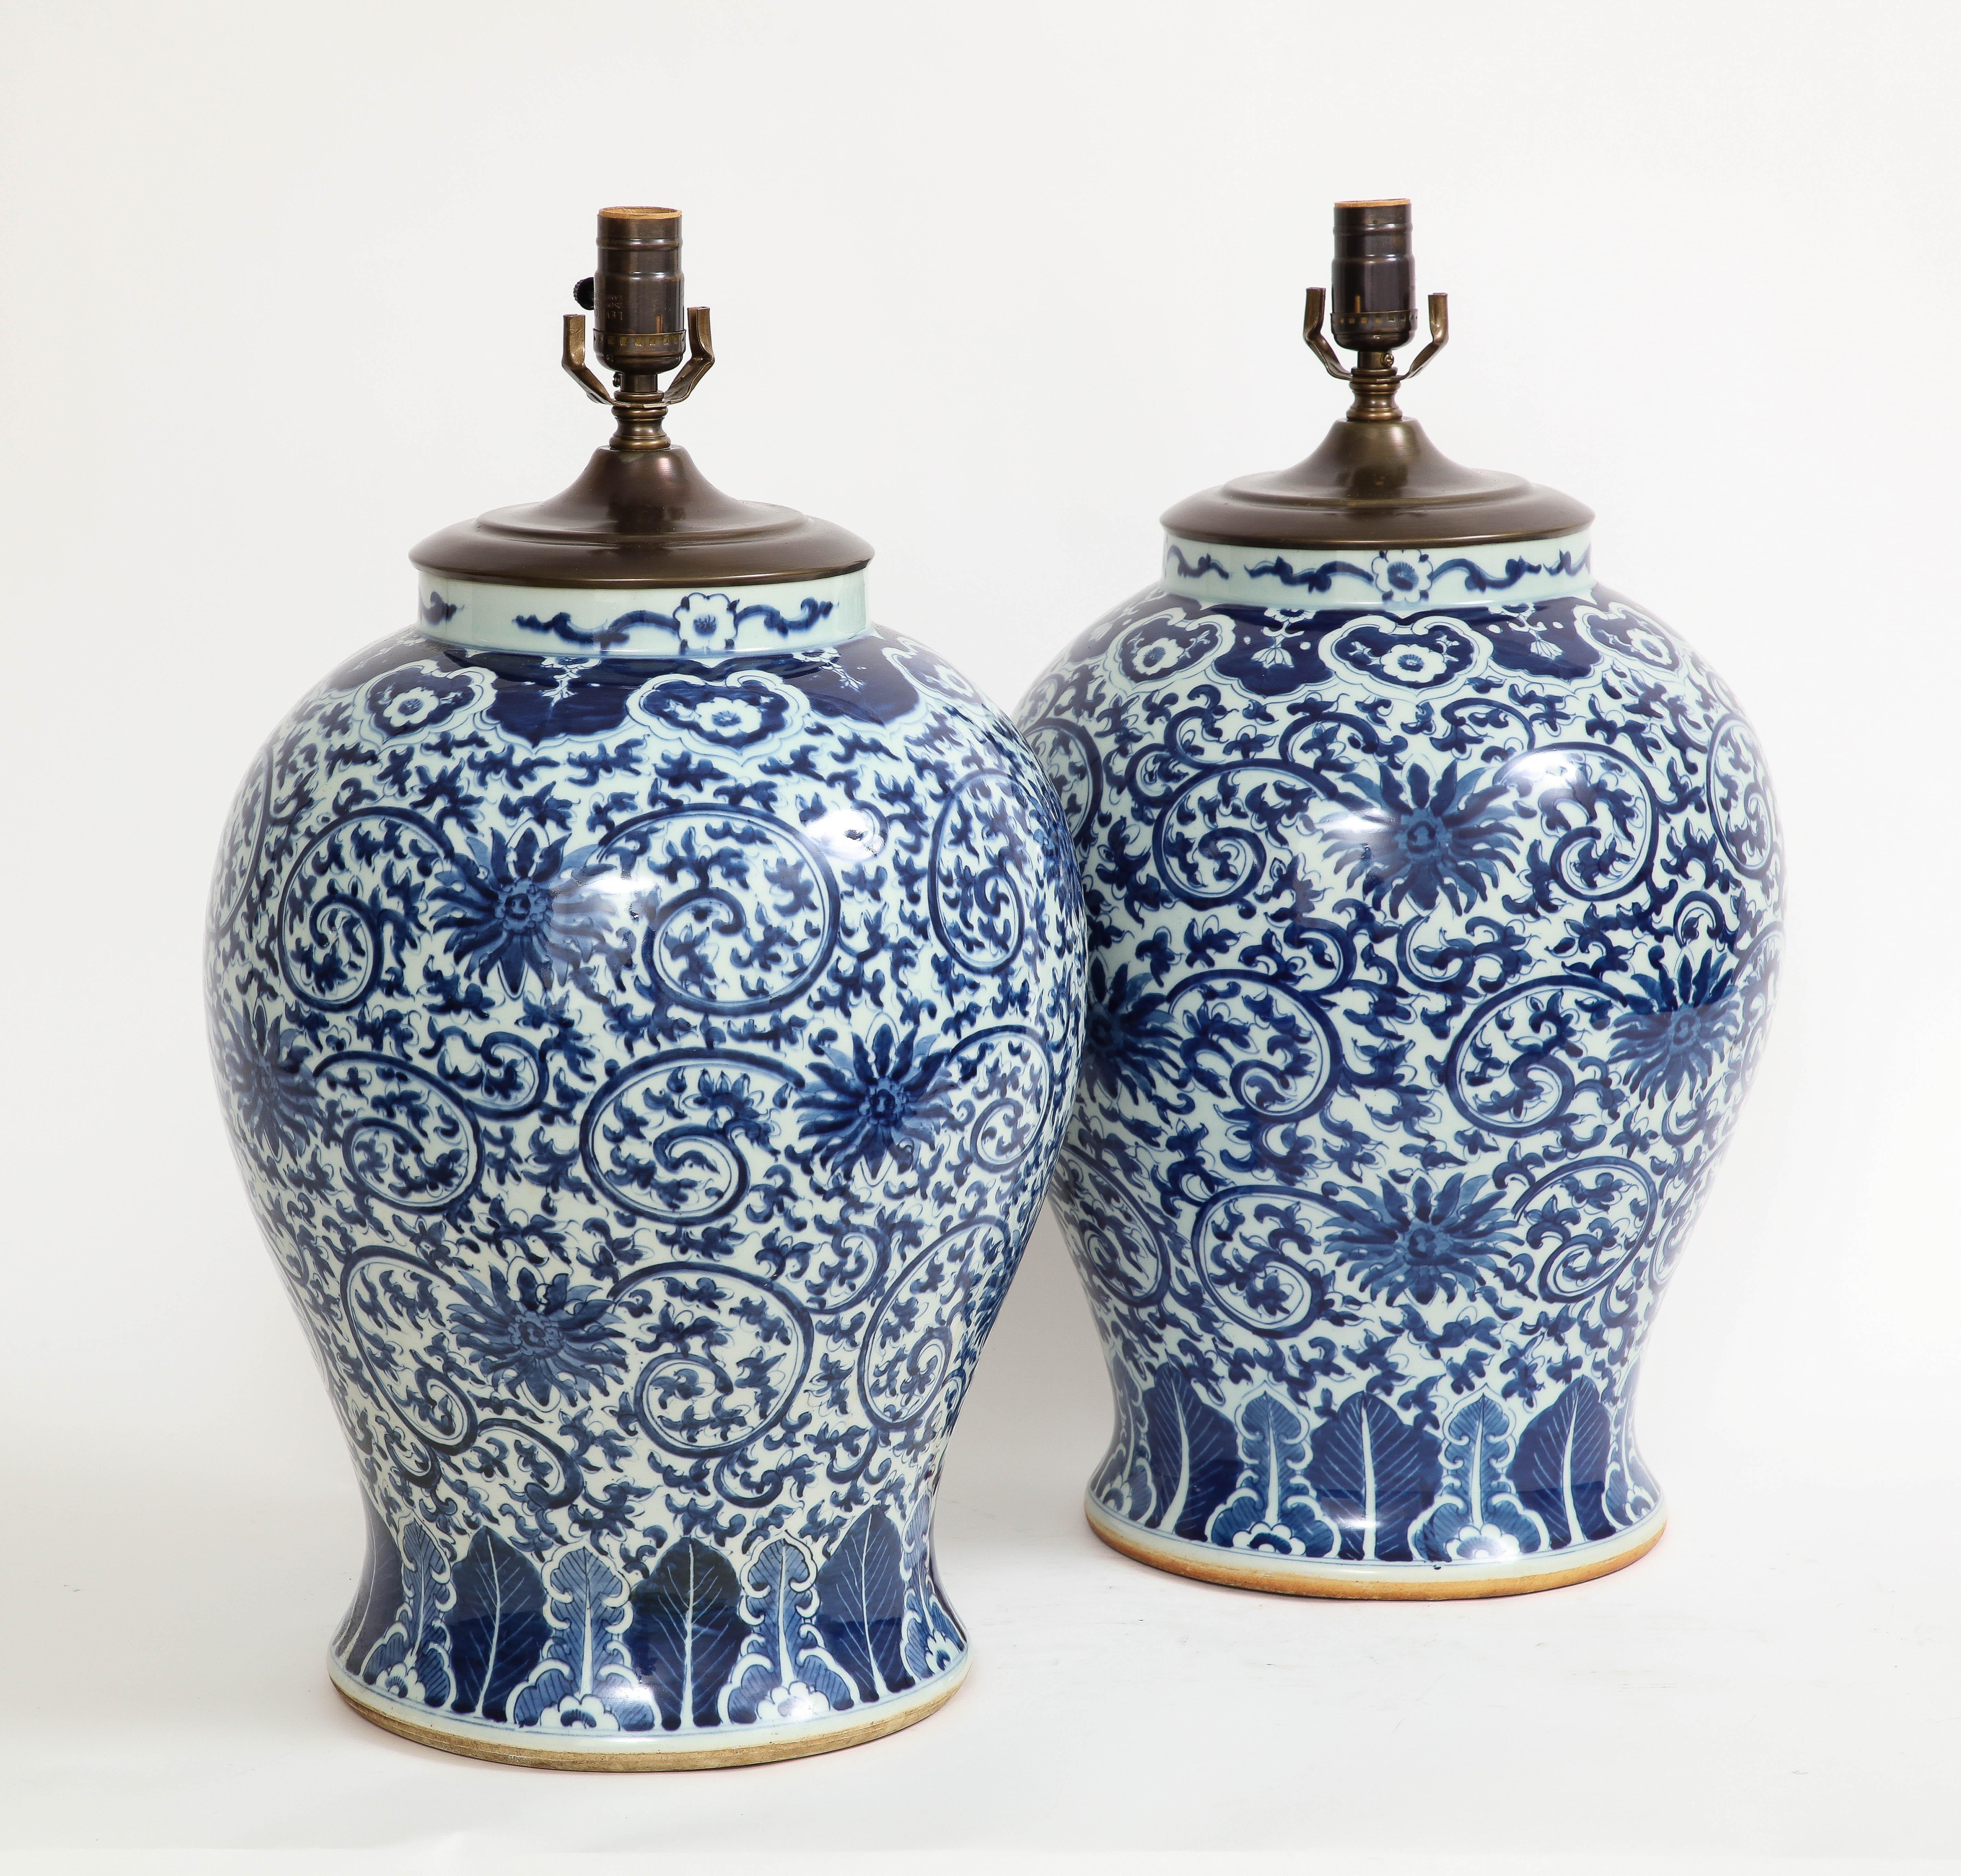 Pair of 19th Century Qing Dynasty Chinese Blue and White Vases Turned to Lamps For Sale 1